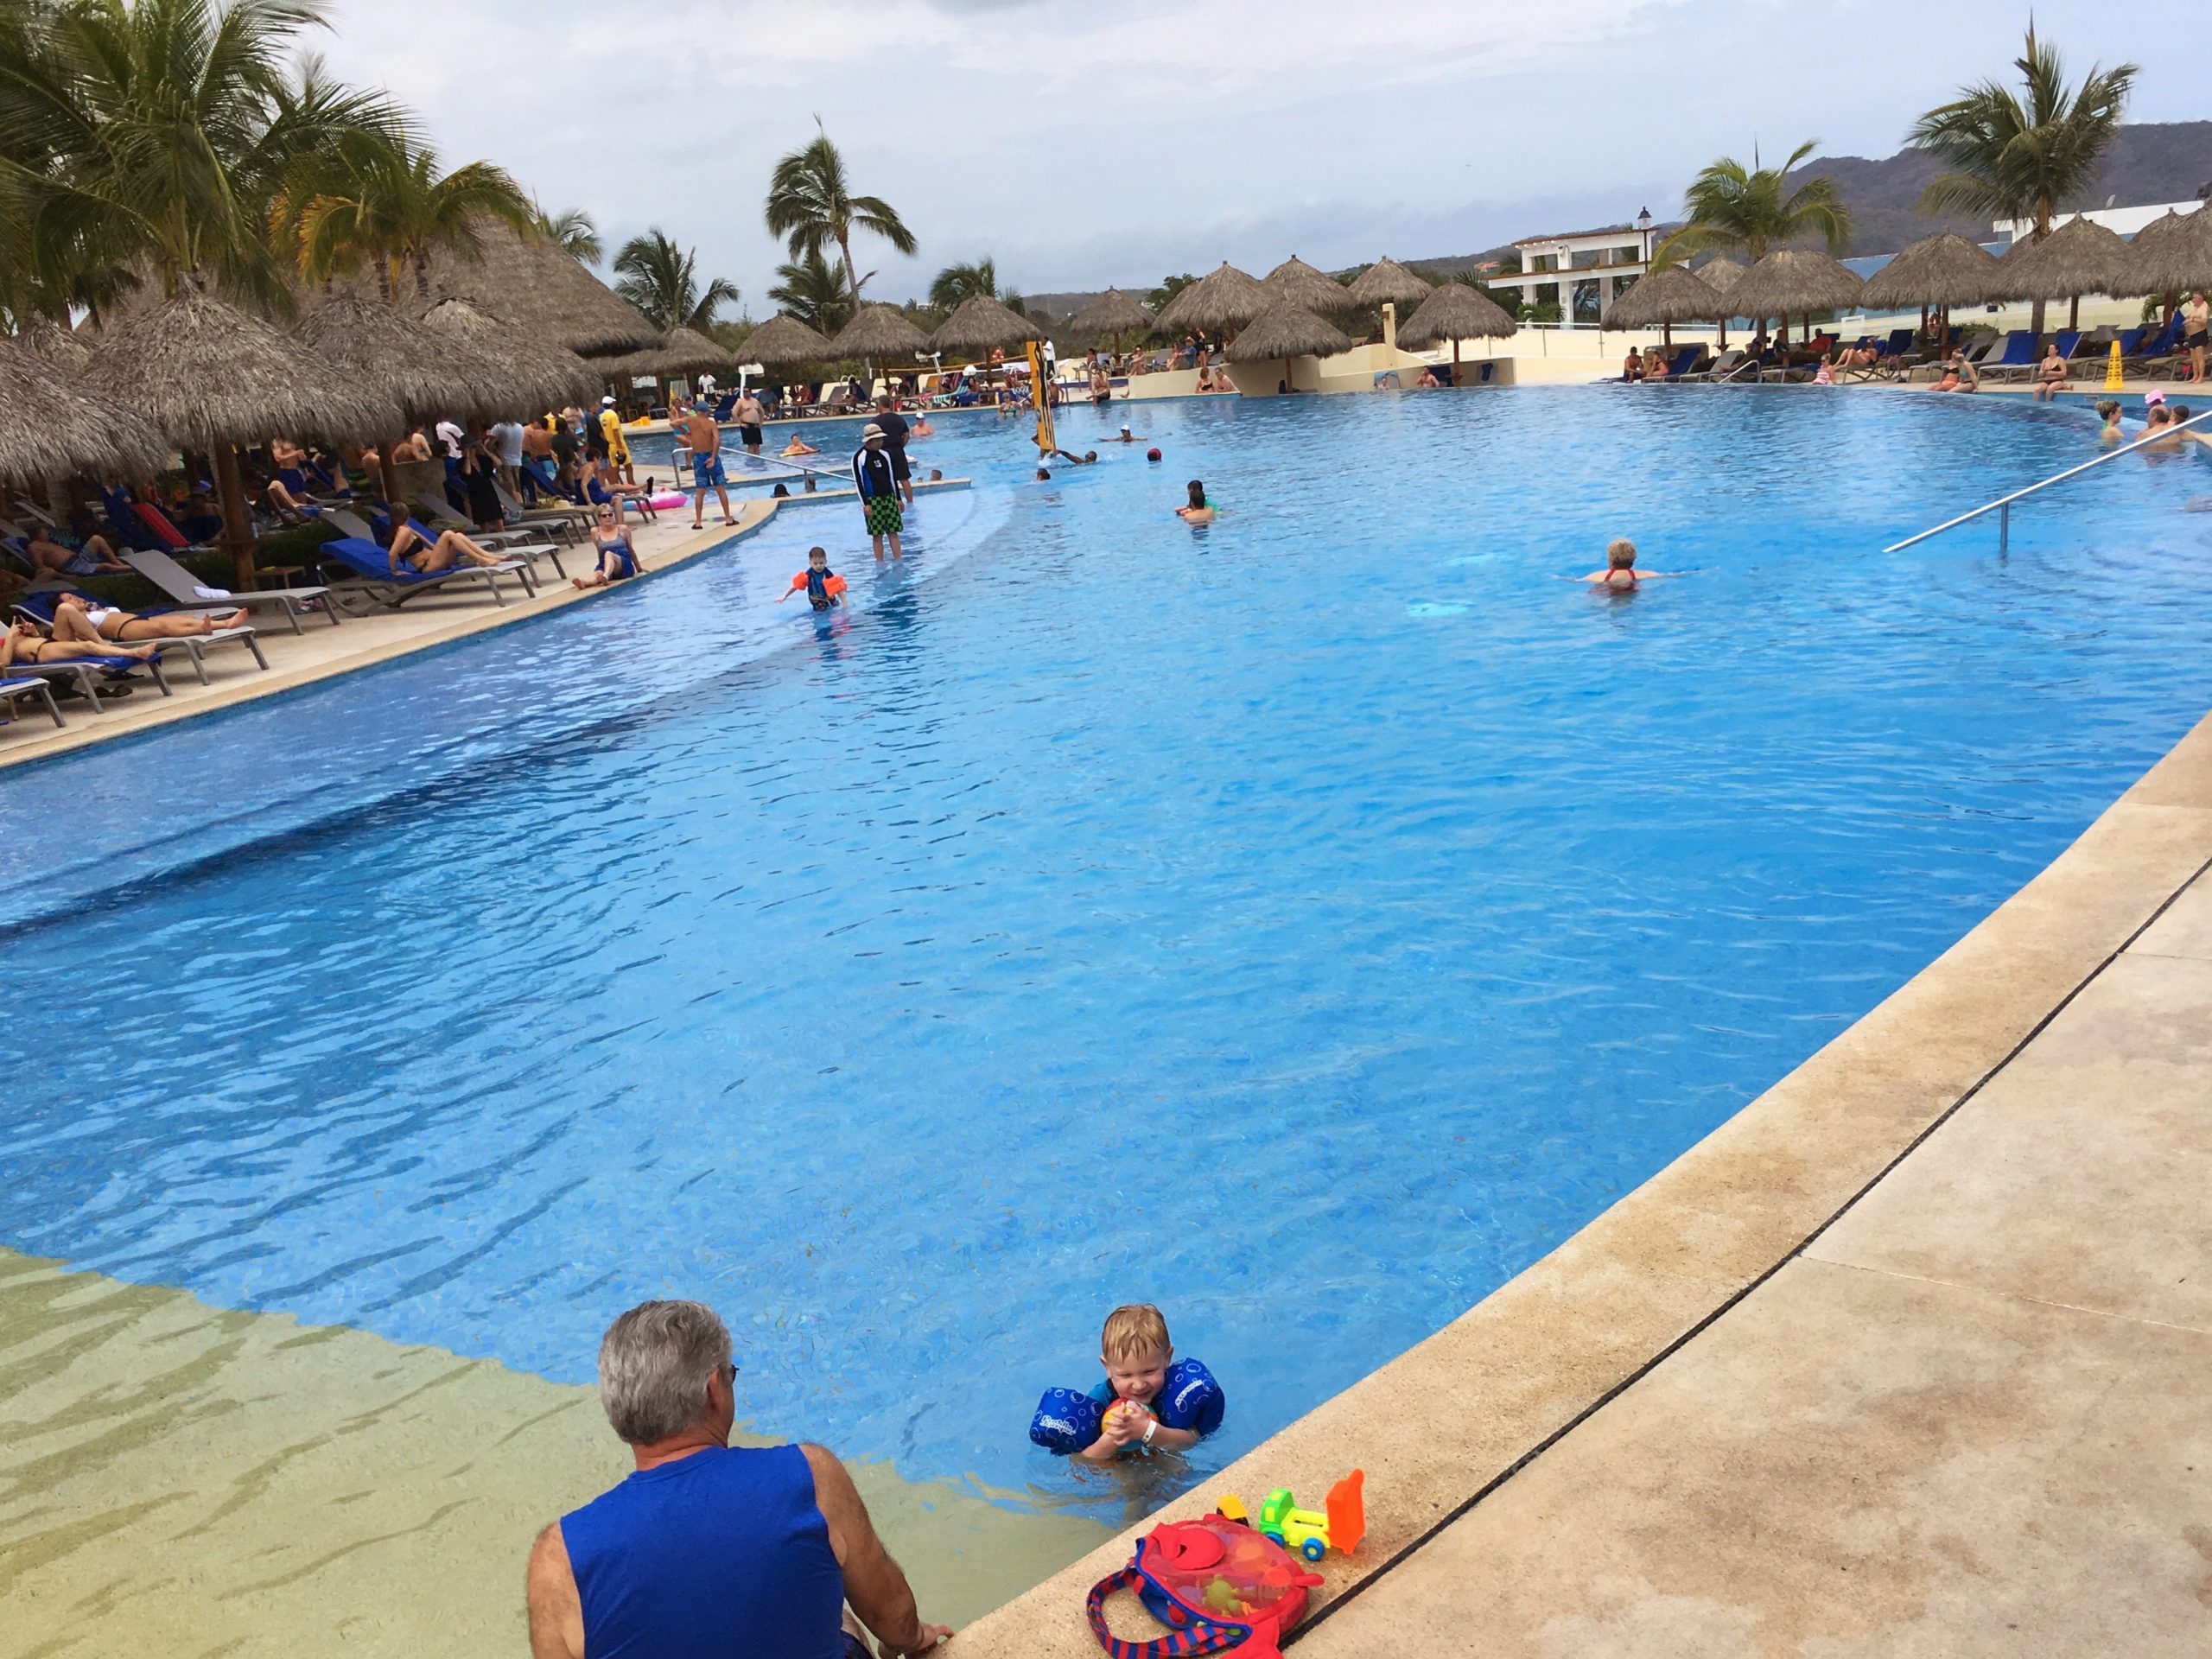 main swimming pool area with beach volleyball set up and a little boy playing in the water